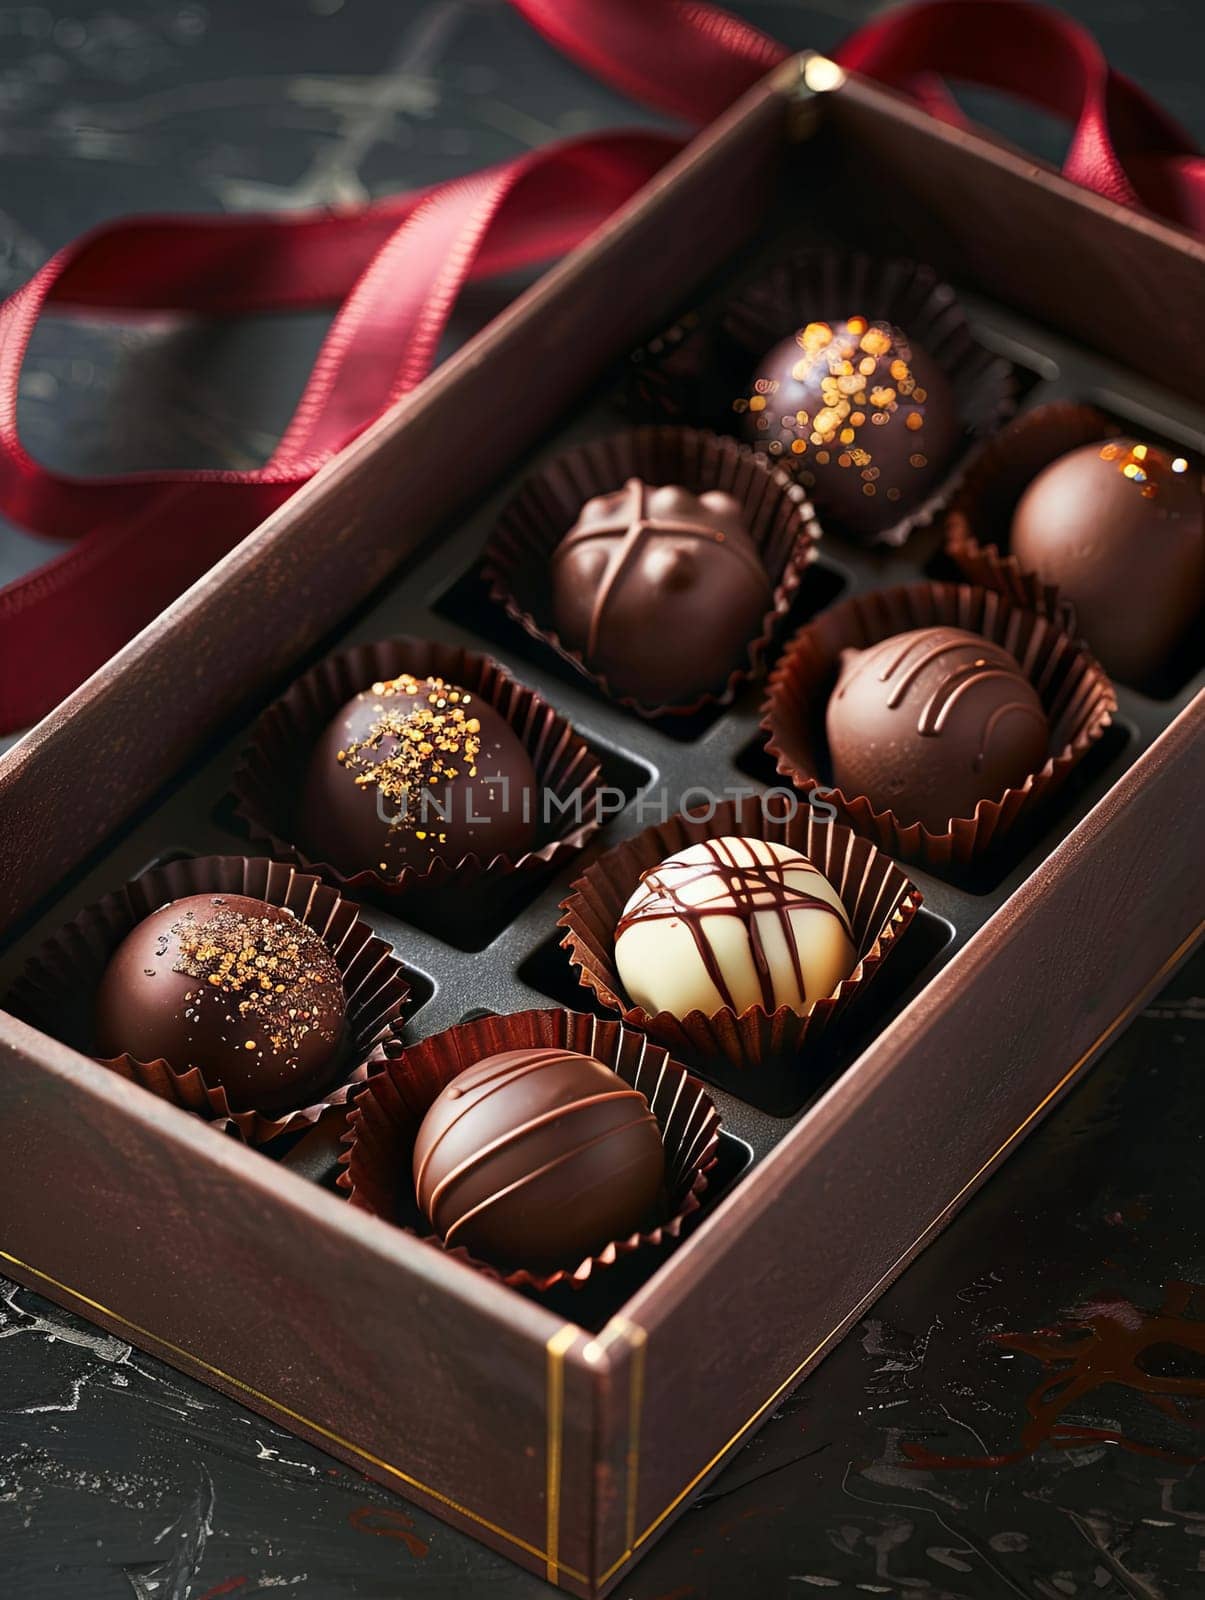 Luxurious box of chocolate truffles with rich dark colors and a red ribbon wrapped around it.